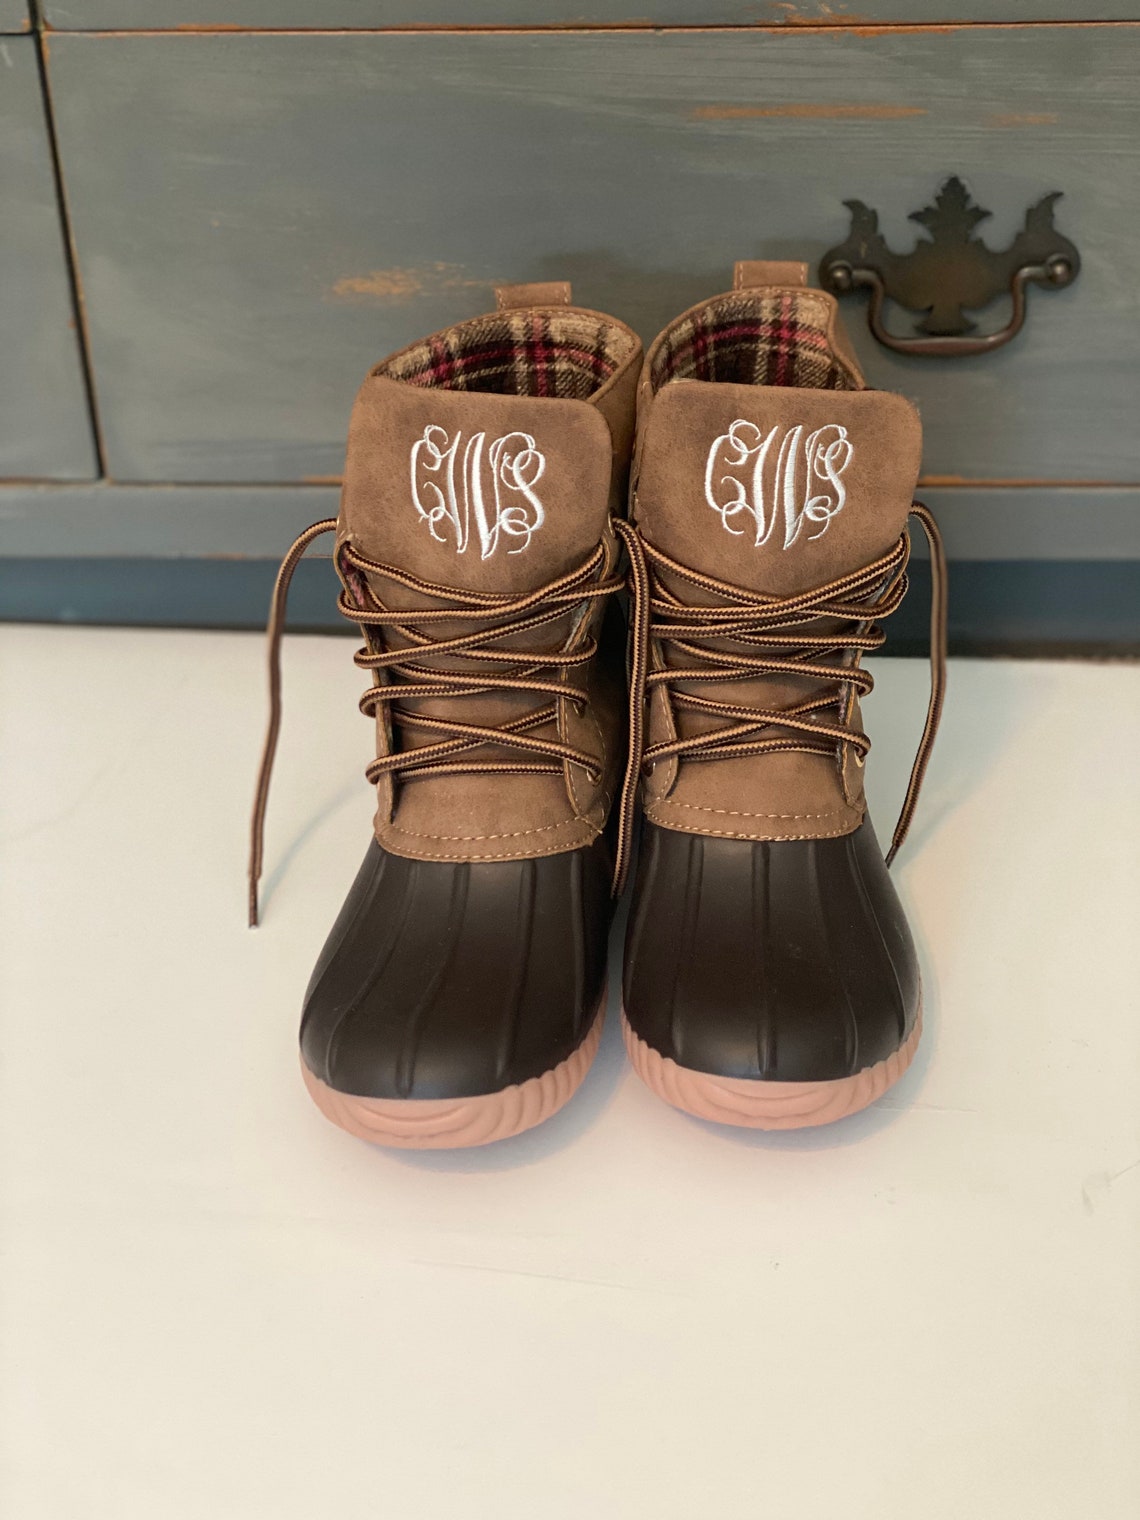 Girls Personalized Duck Boots Monogrammed Short Duck Boots | Etsy